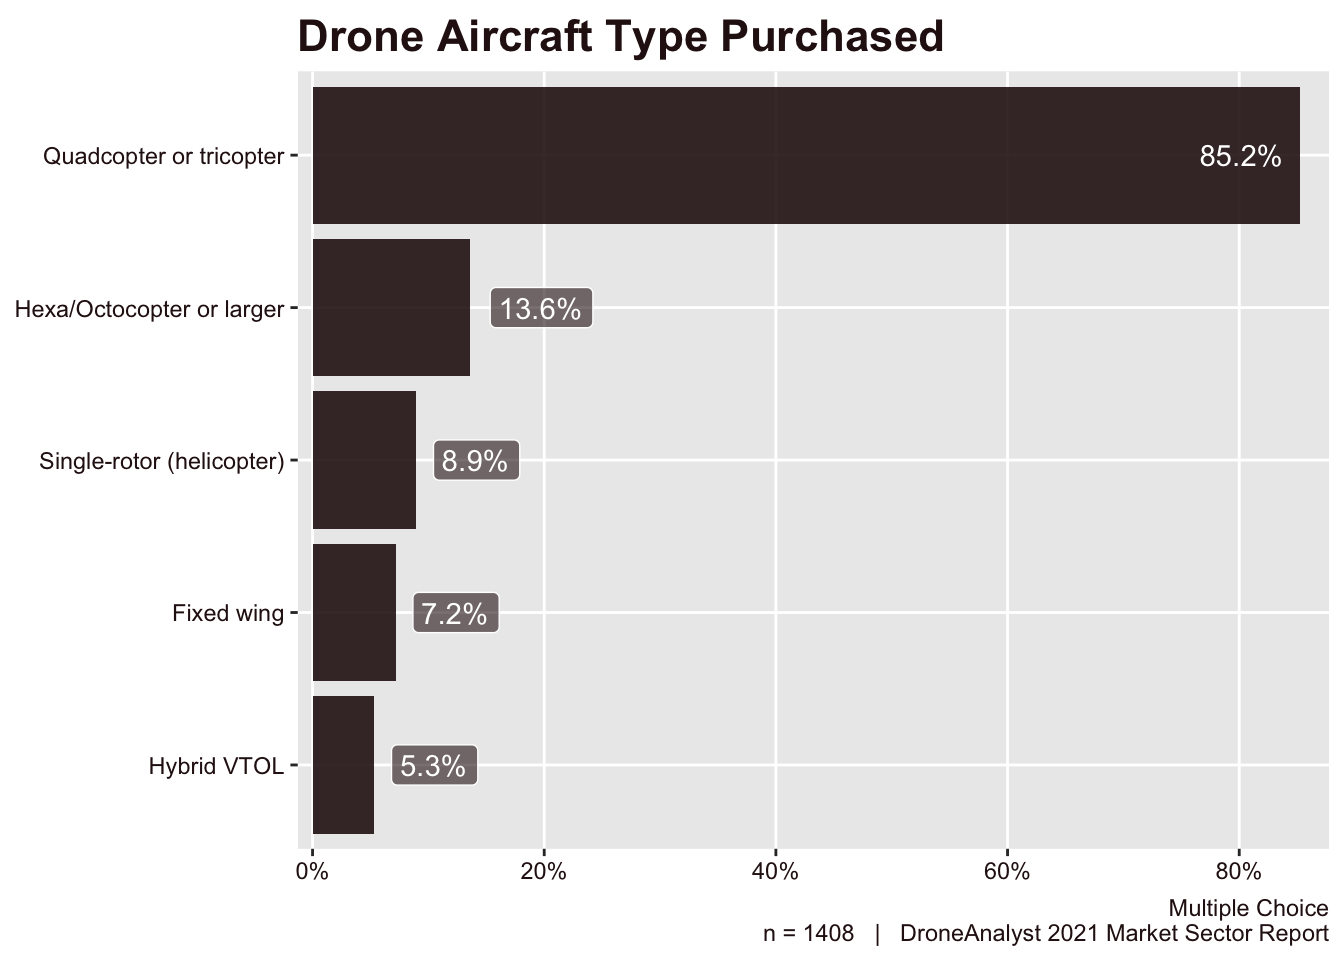 Drone Aircraft Type Purchased